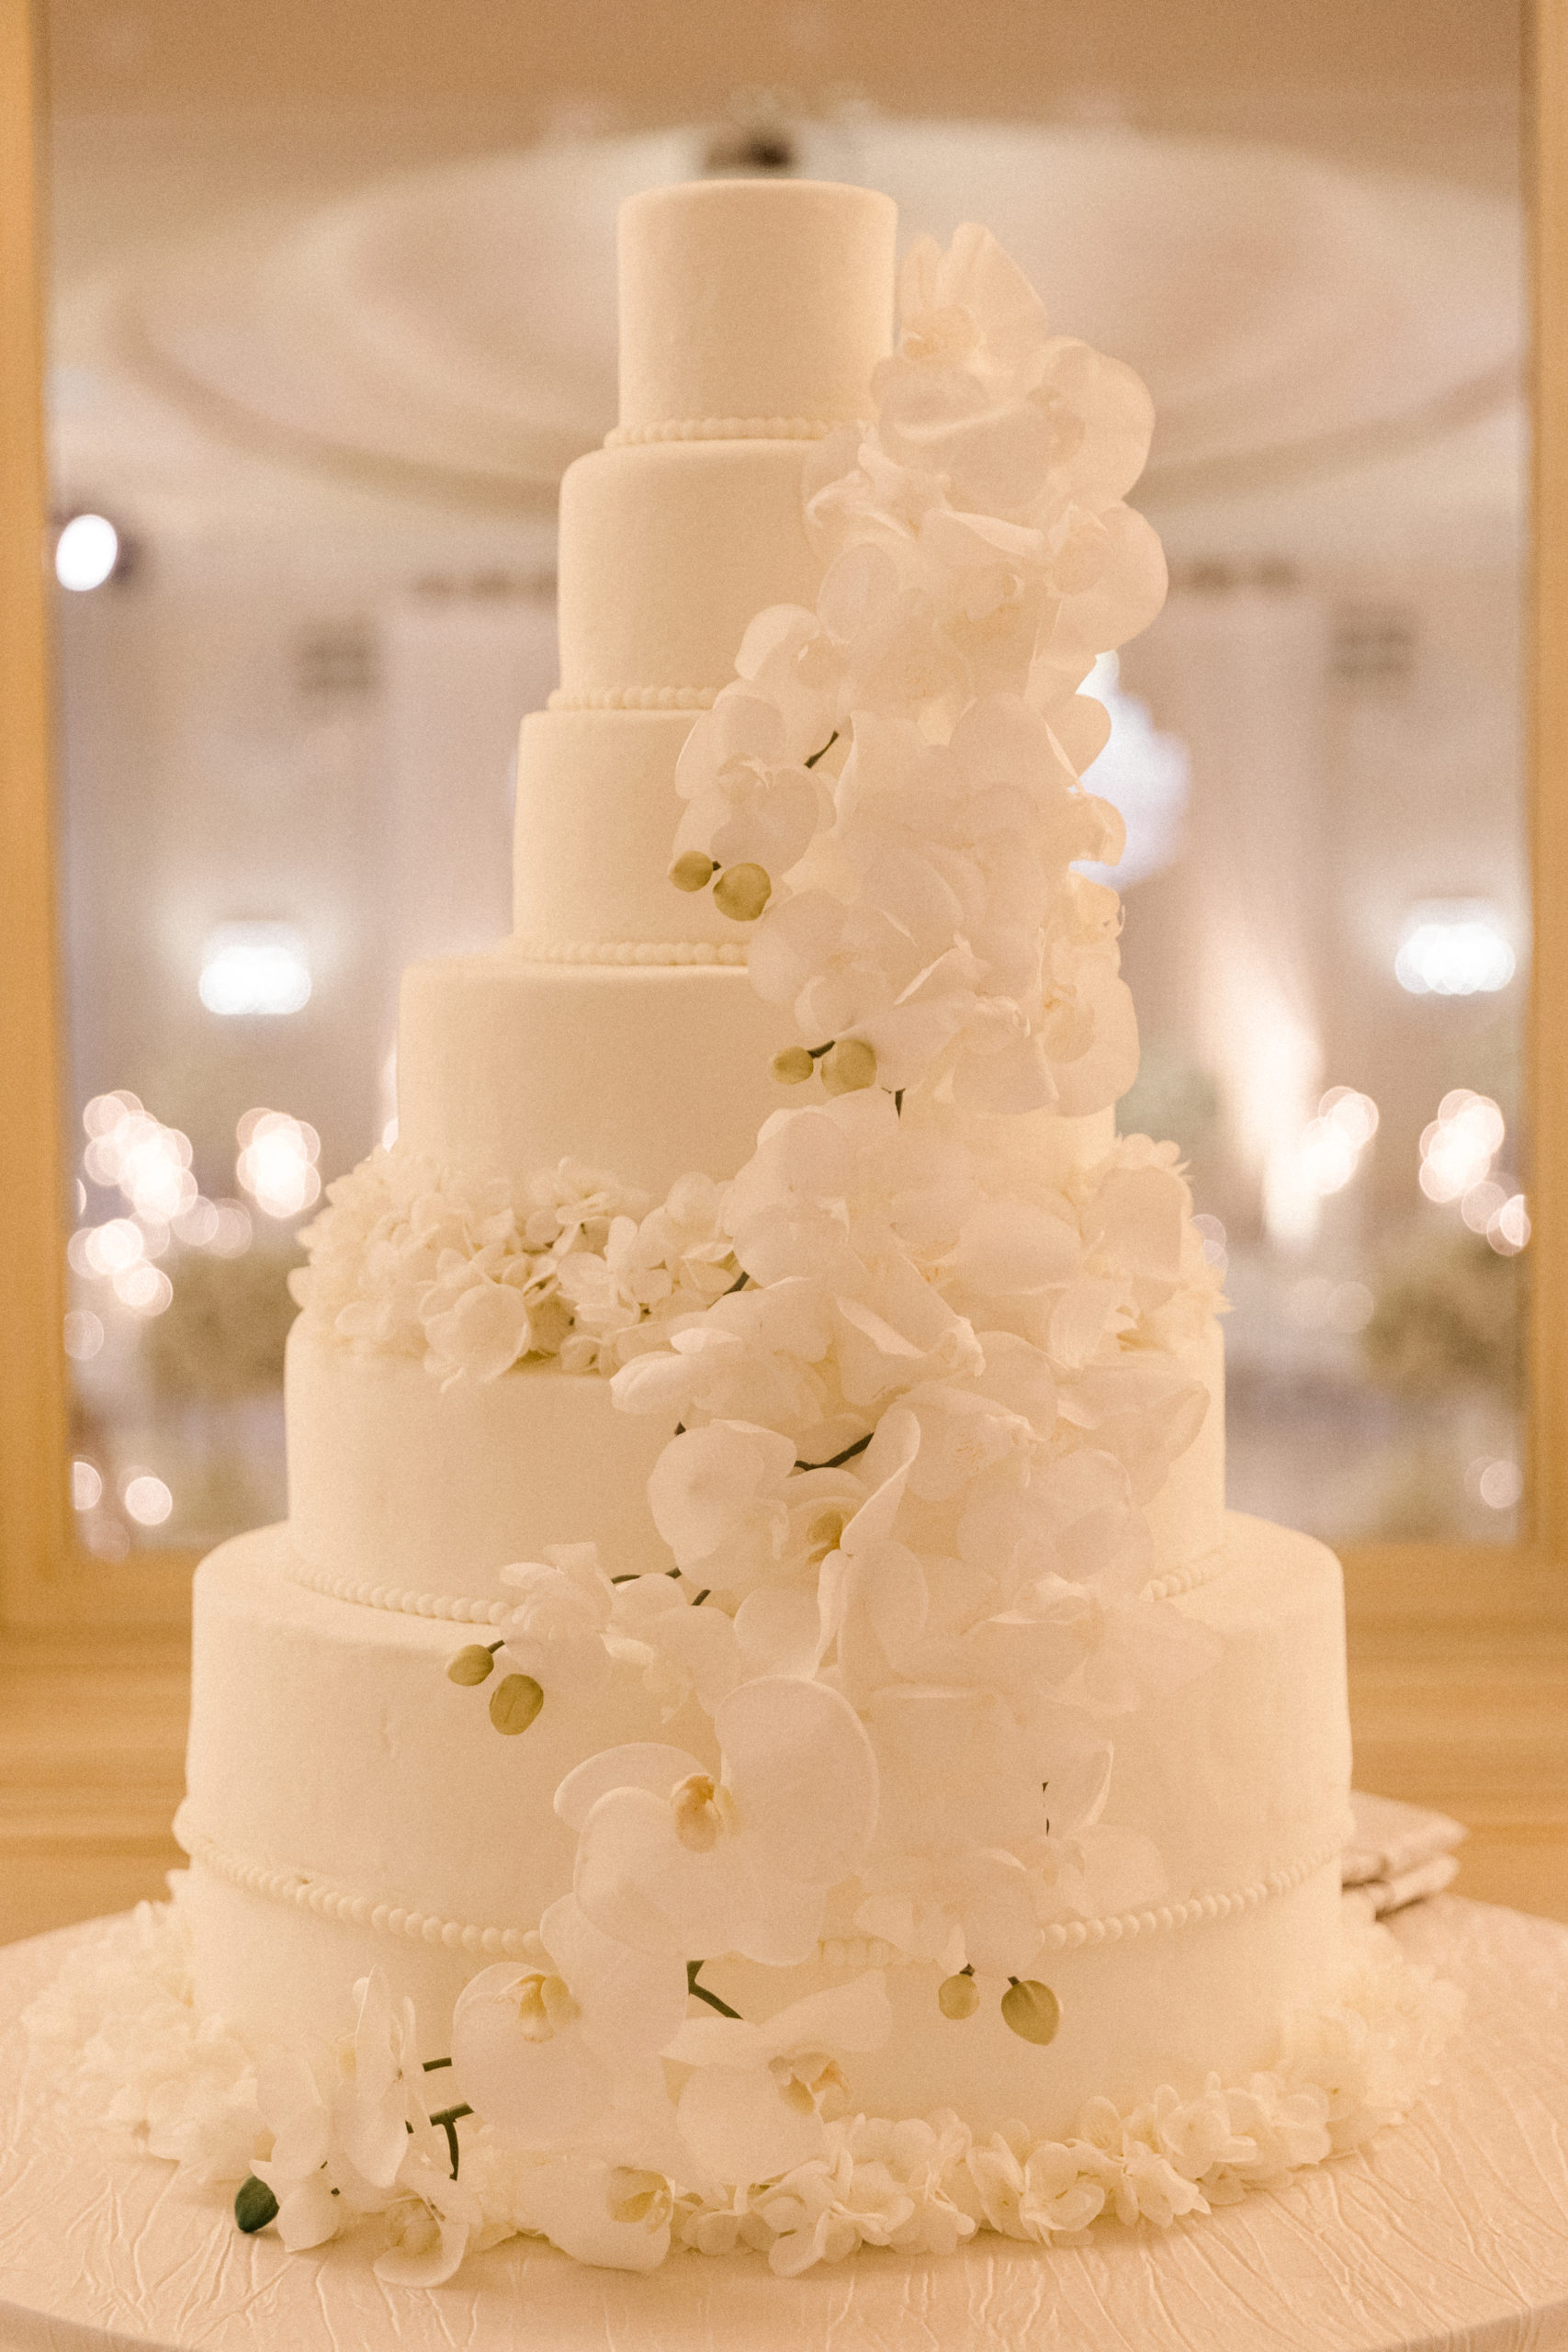 Six-layered white decorative wedding cake with floral orchid decorations on it that gives off an elegant and luxurious vibe